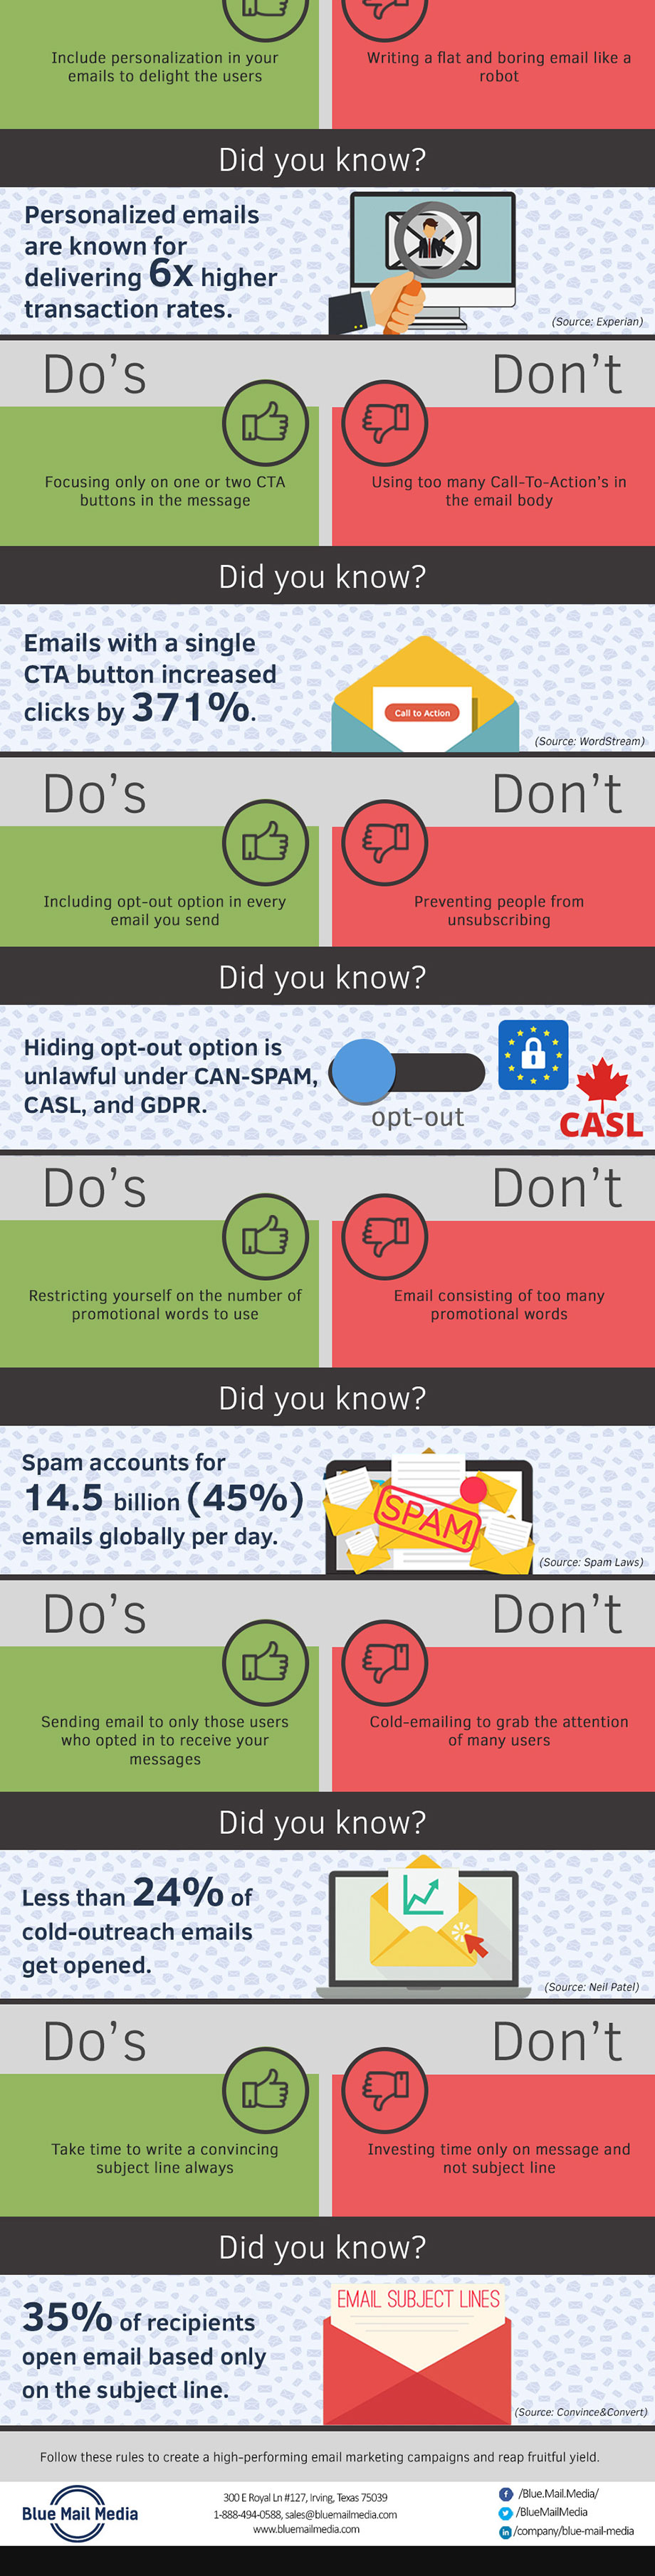 email-marketing-decorum-dos-donts-campaign-success-infographic-2